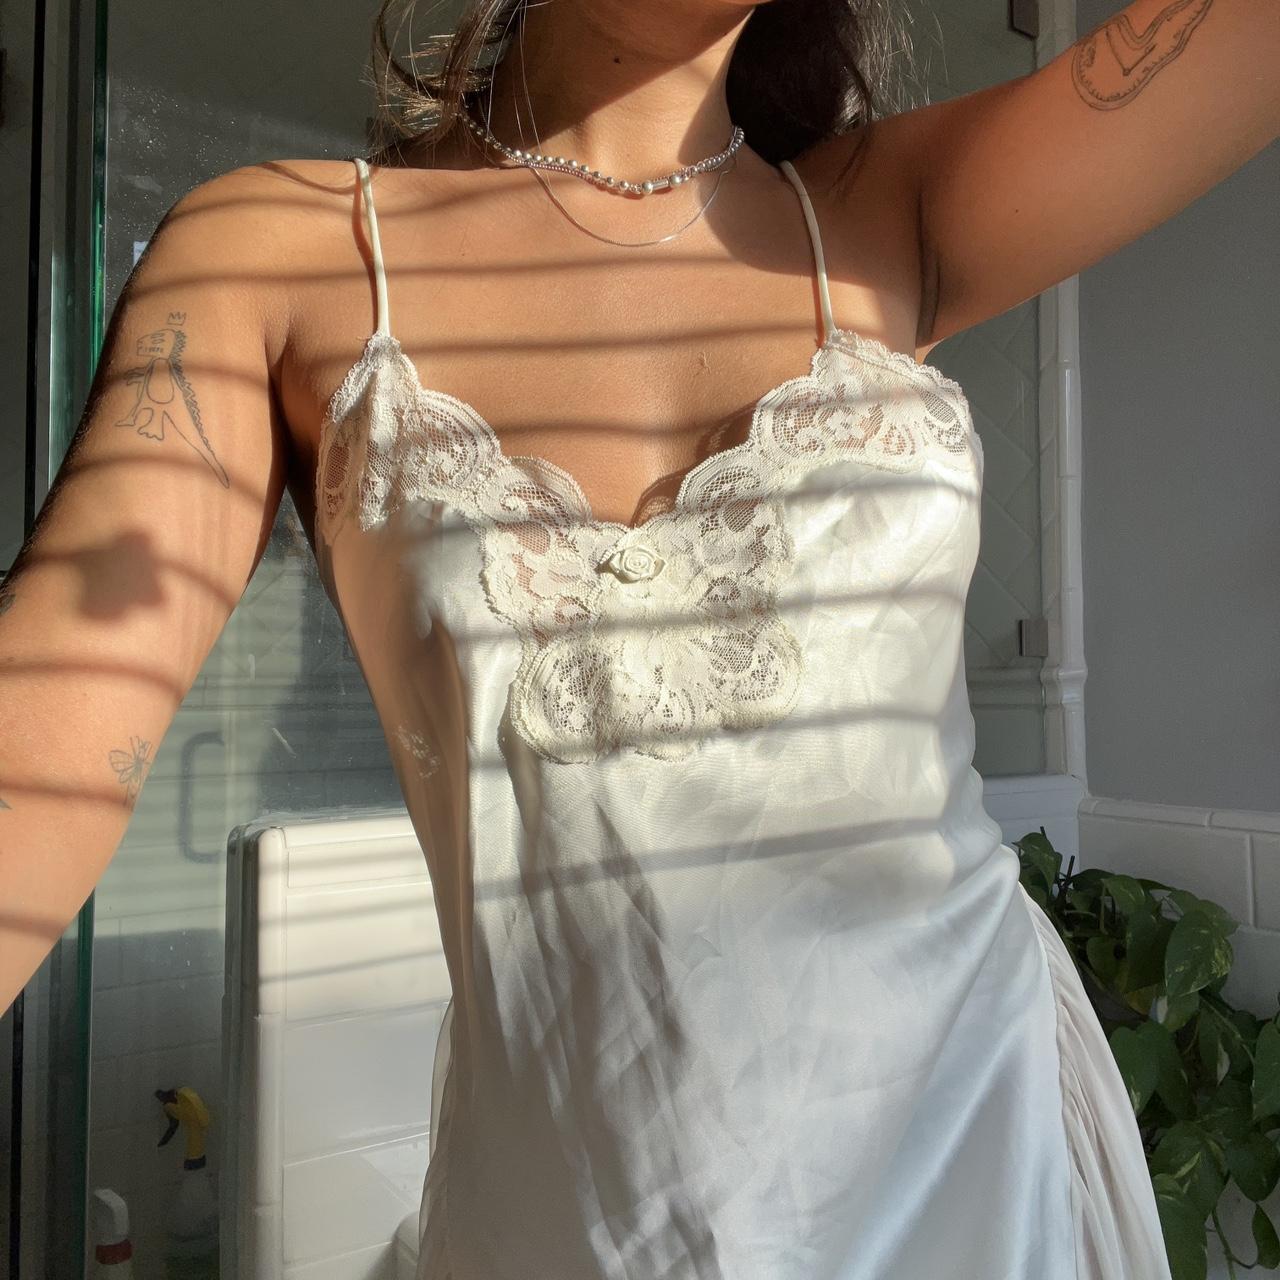 Beautiful white satin vintage corset / bustier with - Depop